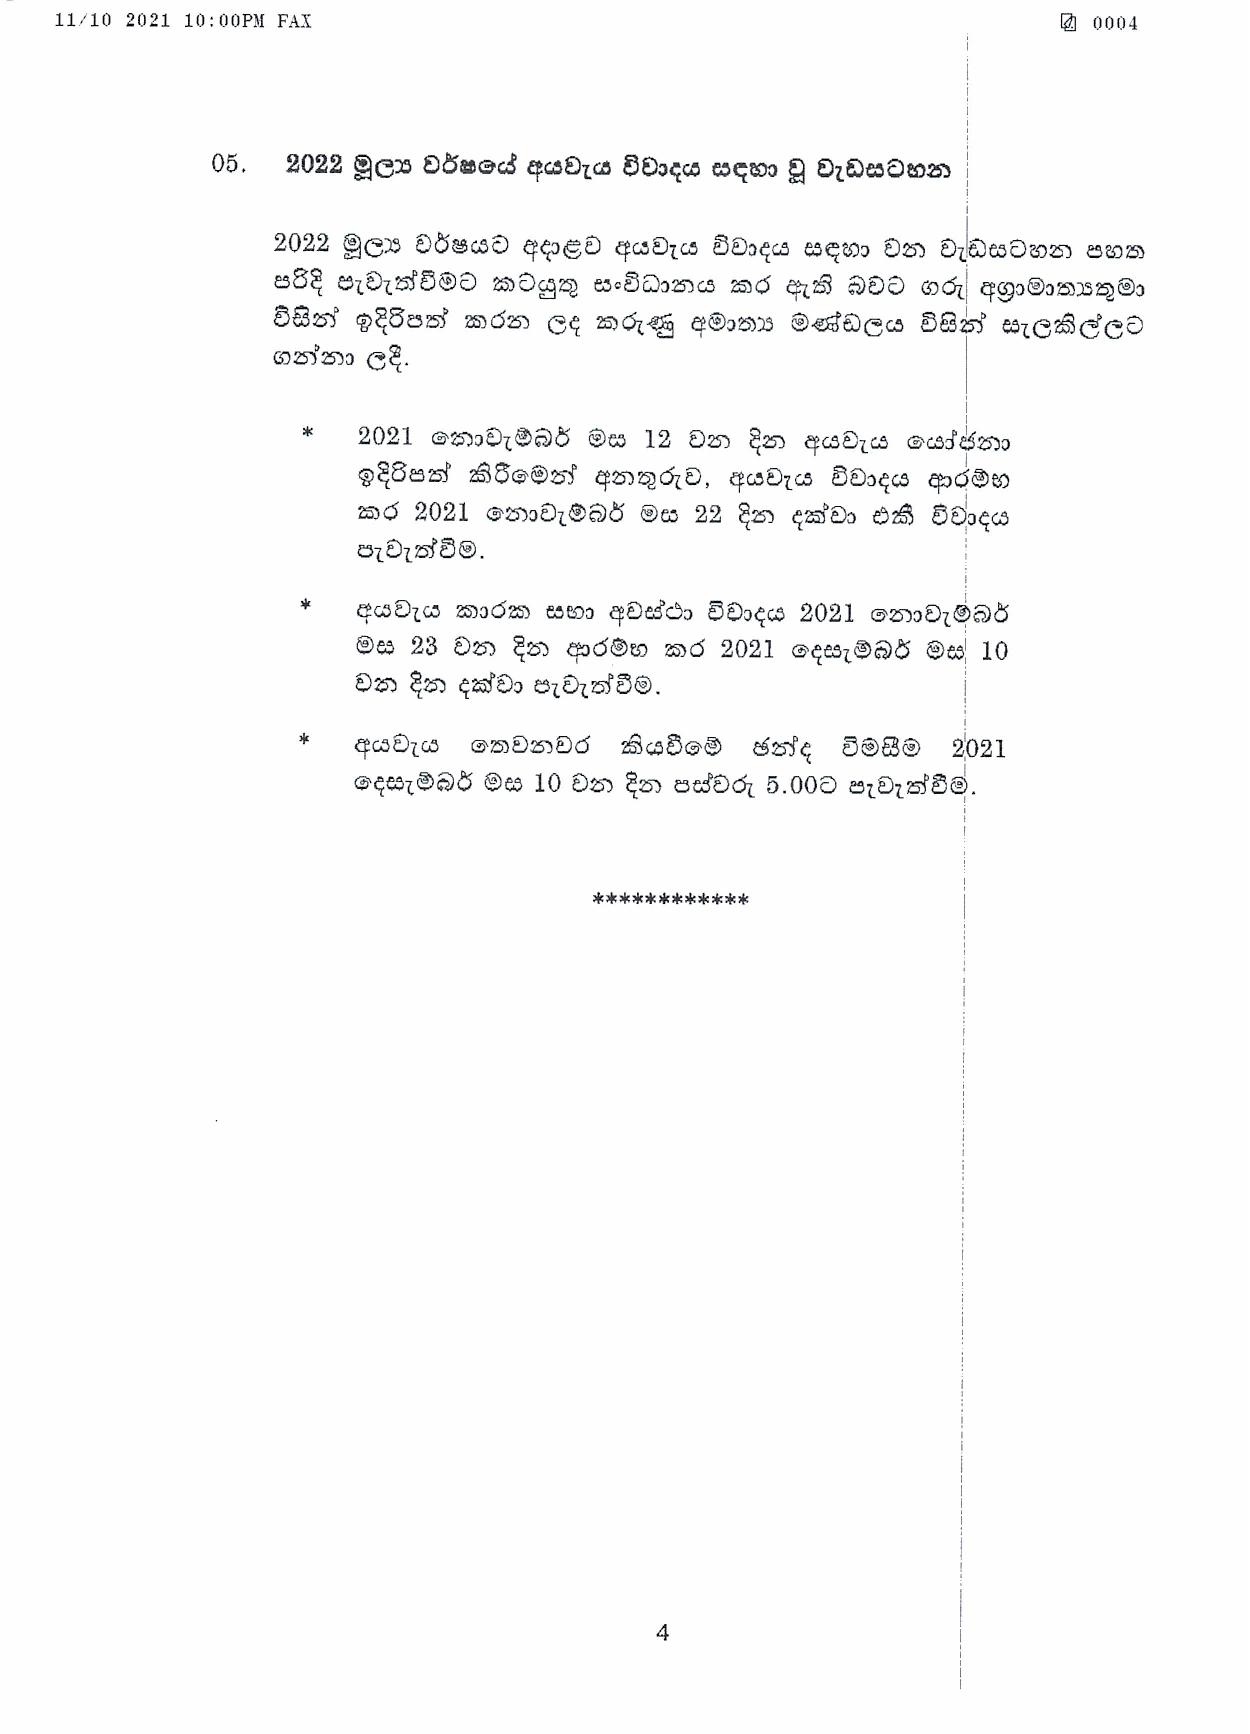 Cabinet Decisions on 11.10.2021 page 004